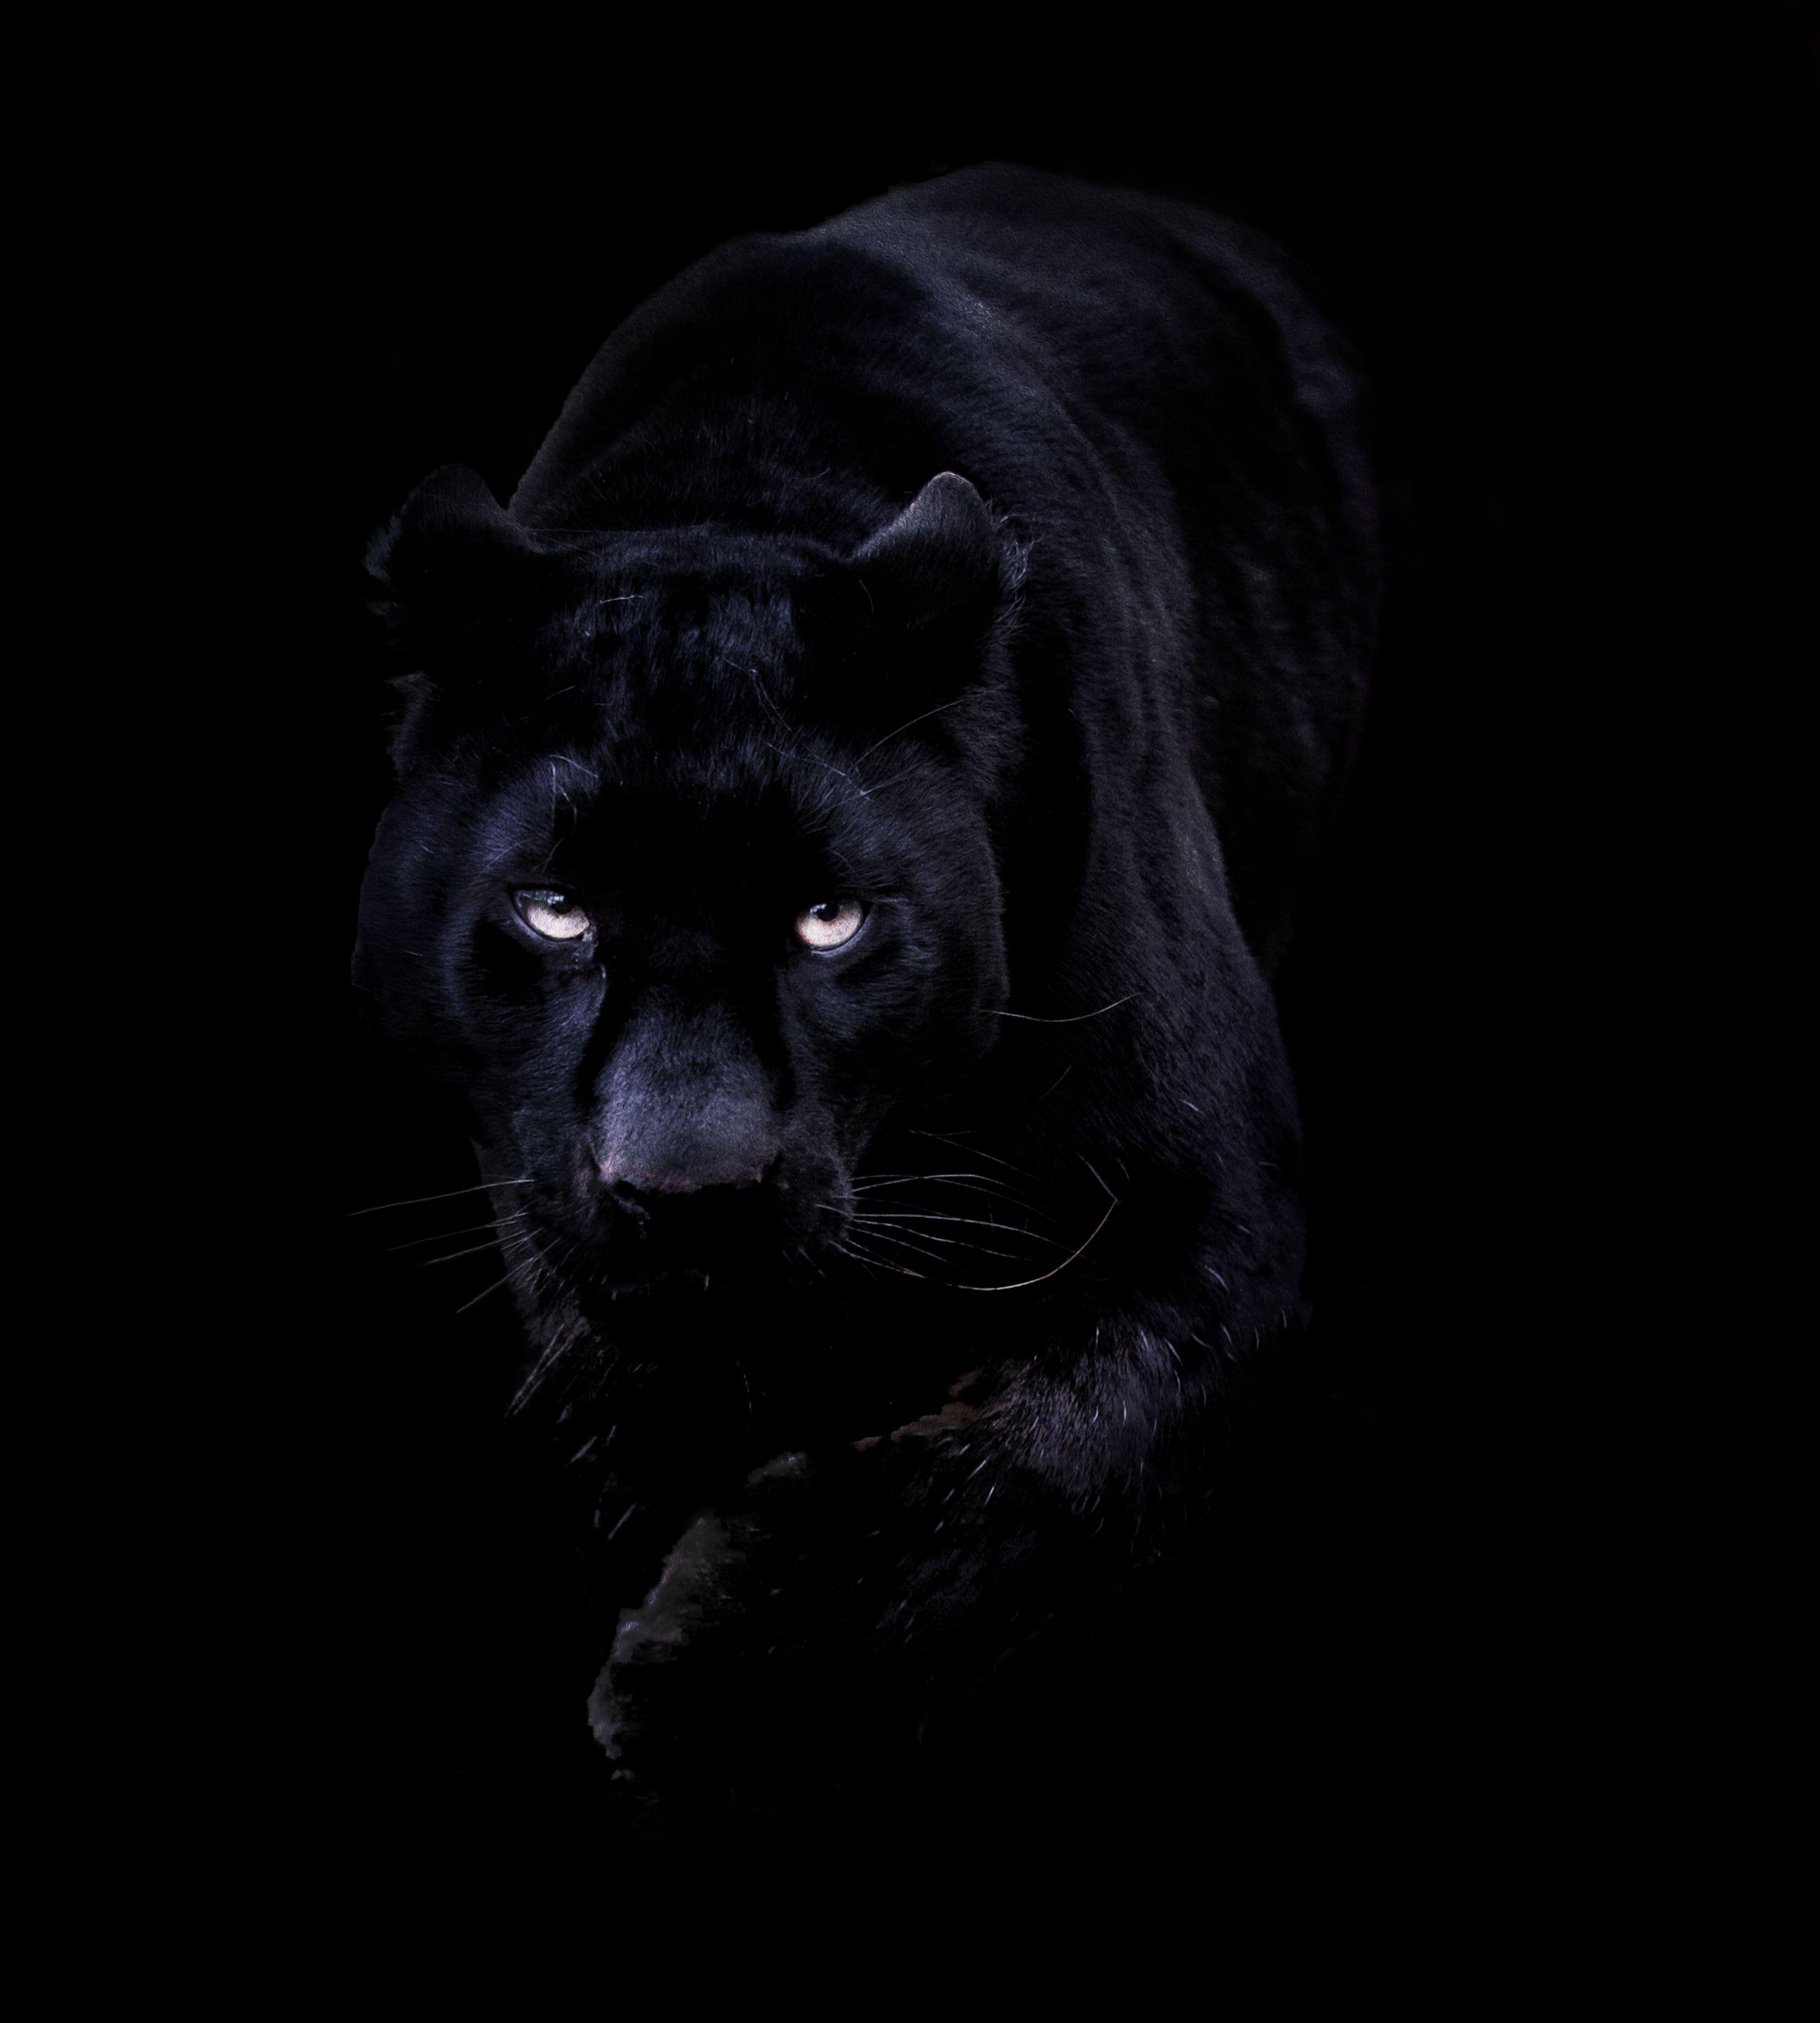 Wide Black Panther iPhone Wallpaper For Windows Wallpaper Full HD